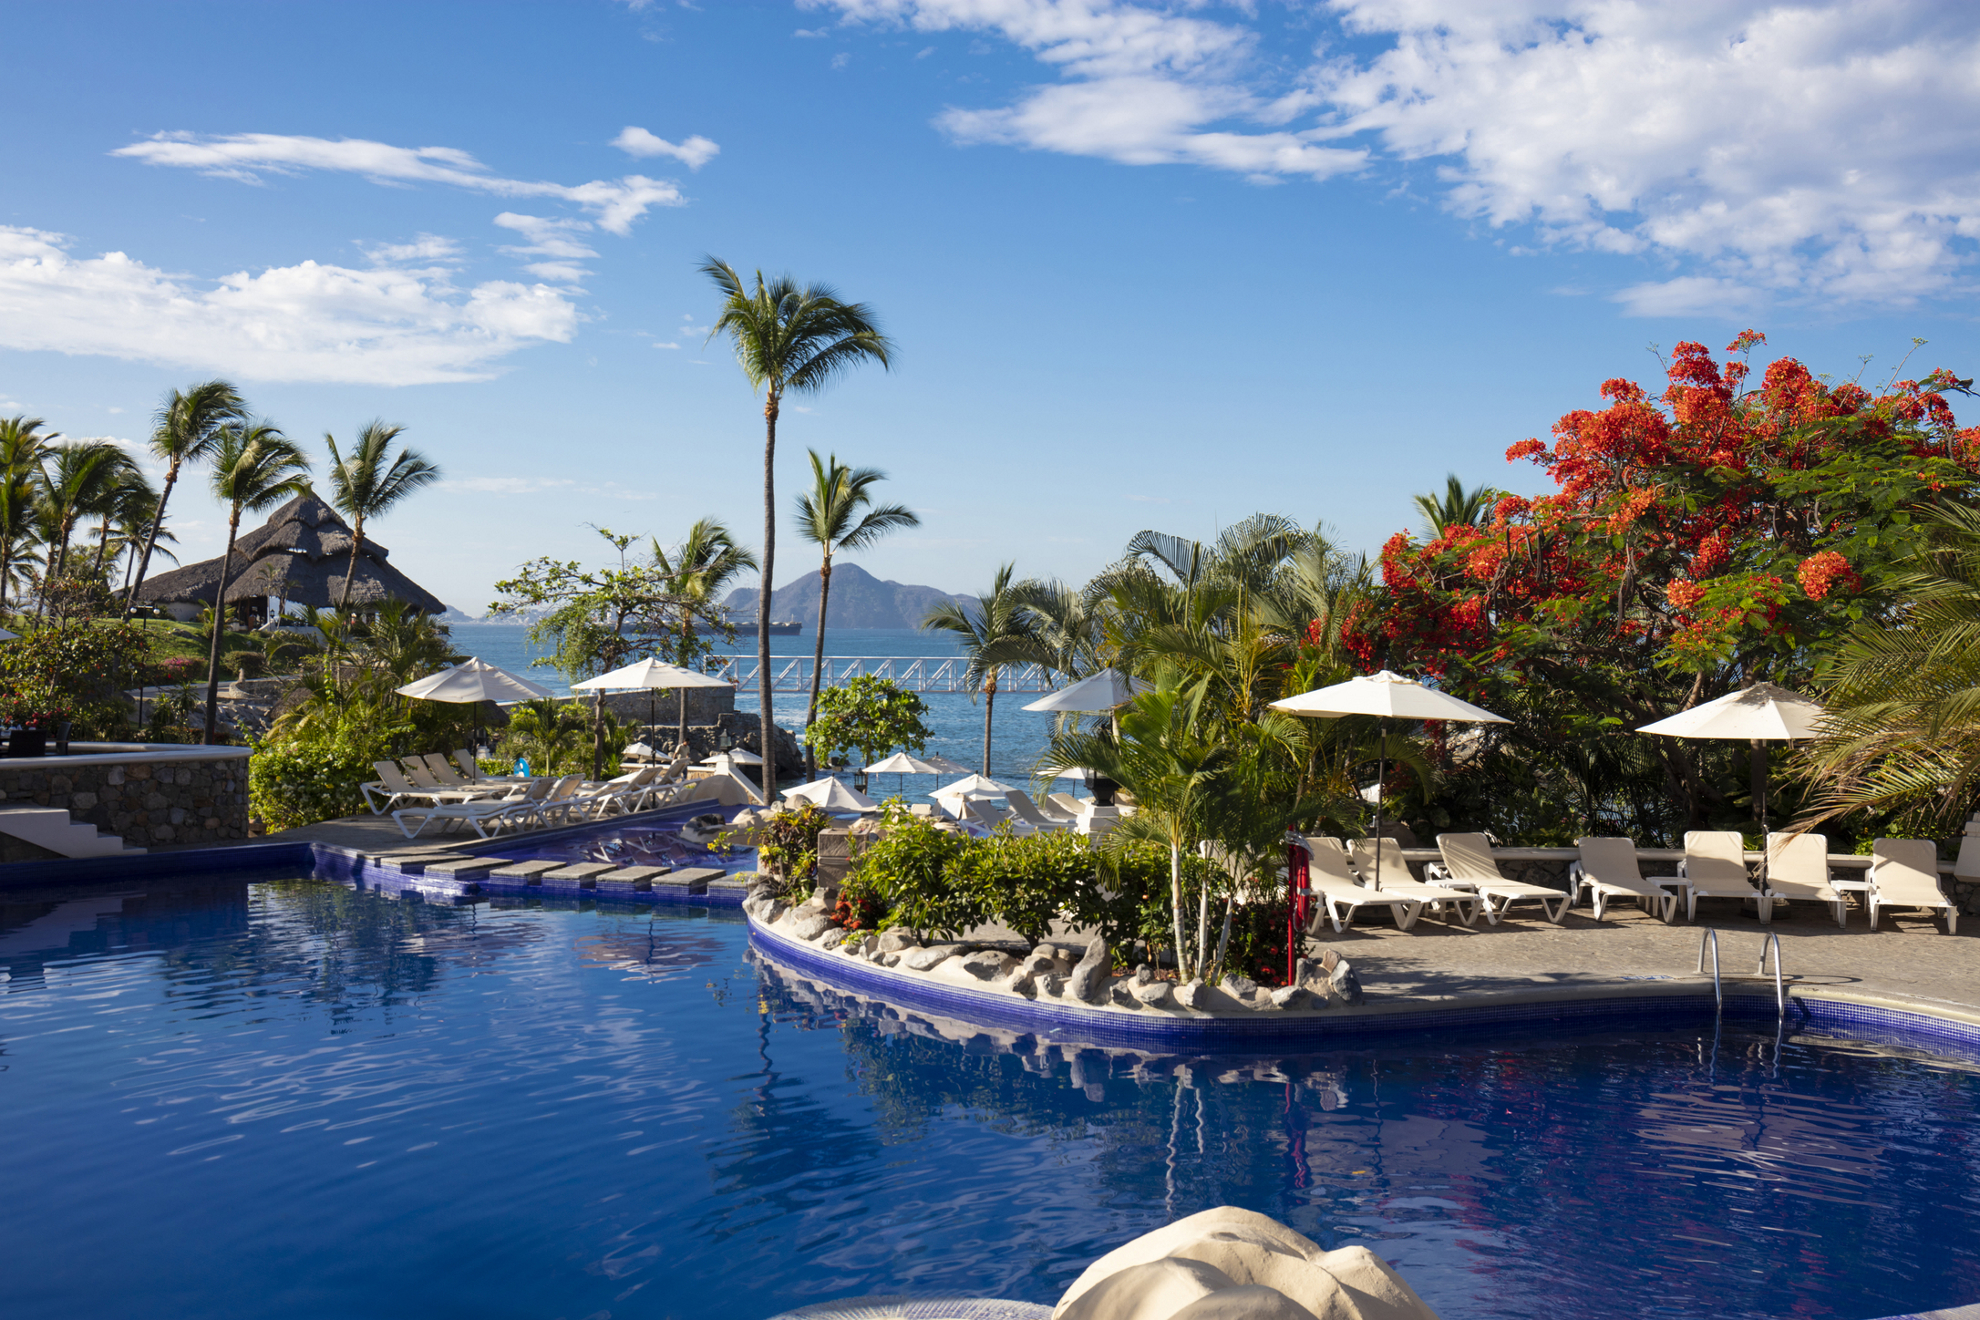 Manzanillo is home to some of the best hotels on the Pacific coast like the Barcelo Karmina